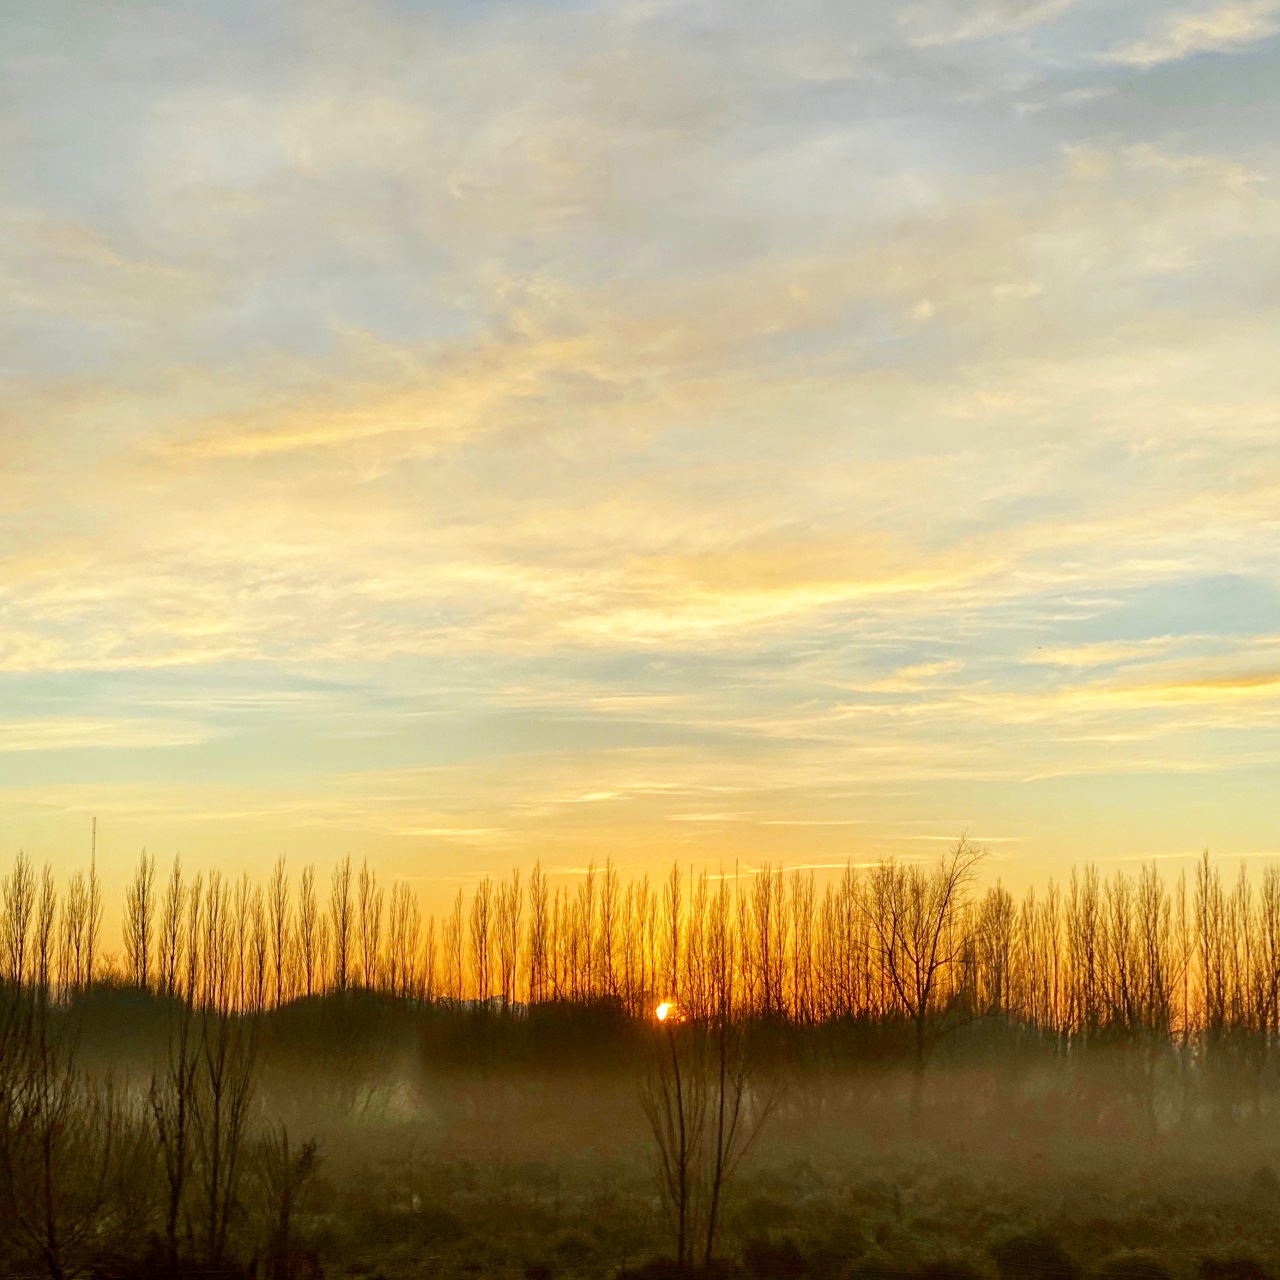 The sun is low on the horizon poking between a copse of tall slender bare trees while fog hangs low over the marshlands and the light blue sky is full of pastel yellow clouds in Marshlands, Christchurch, New Zealand